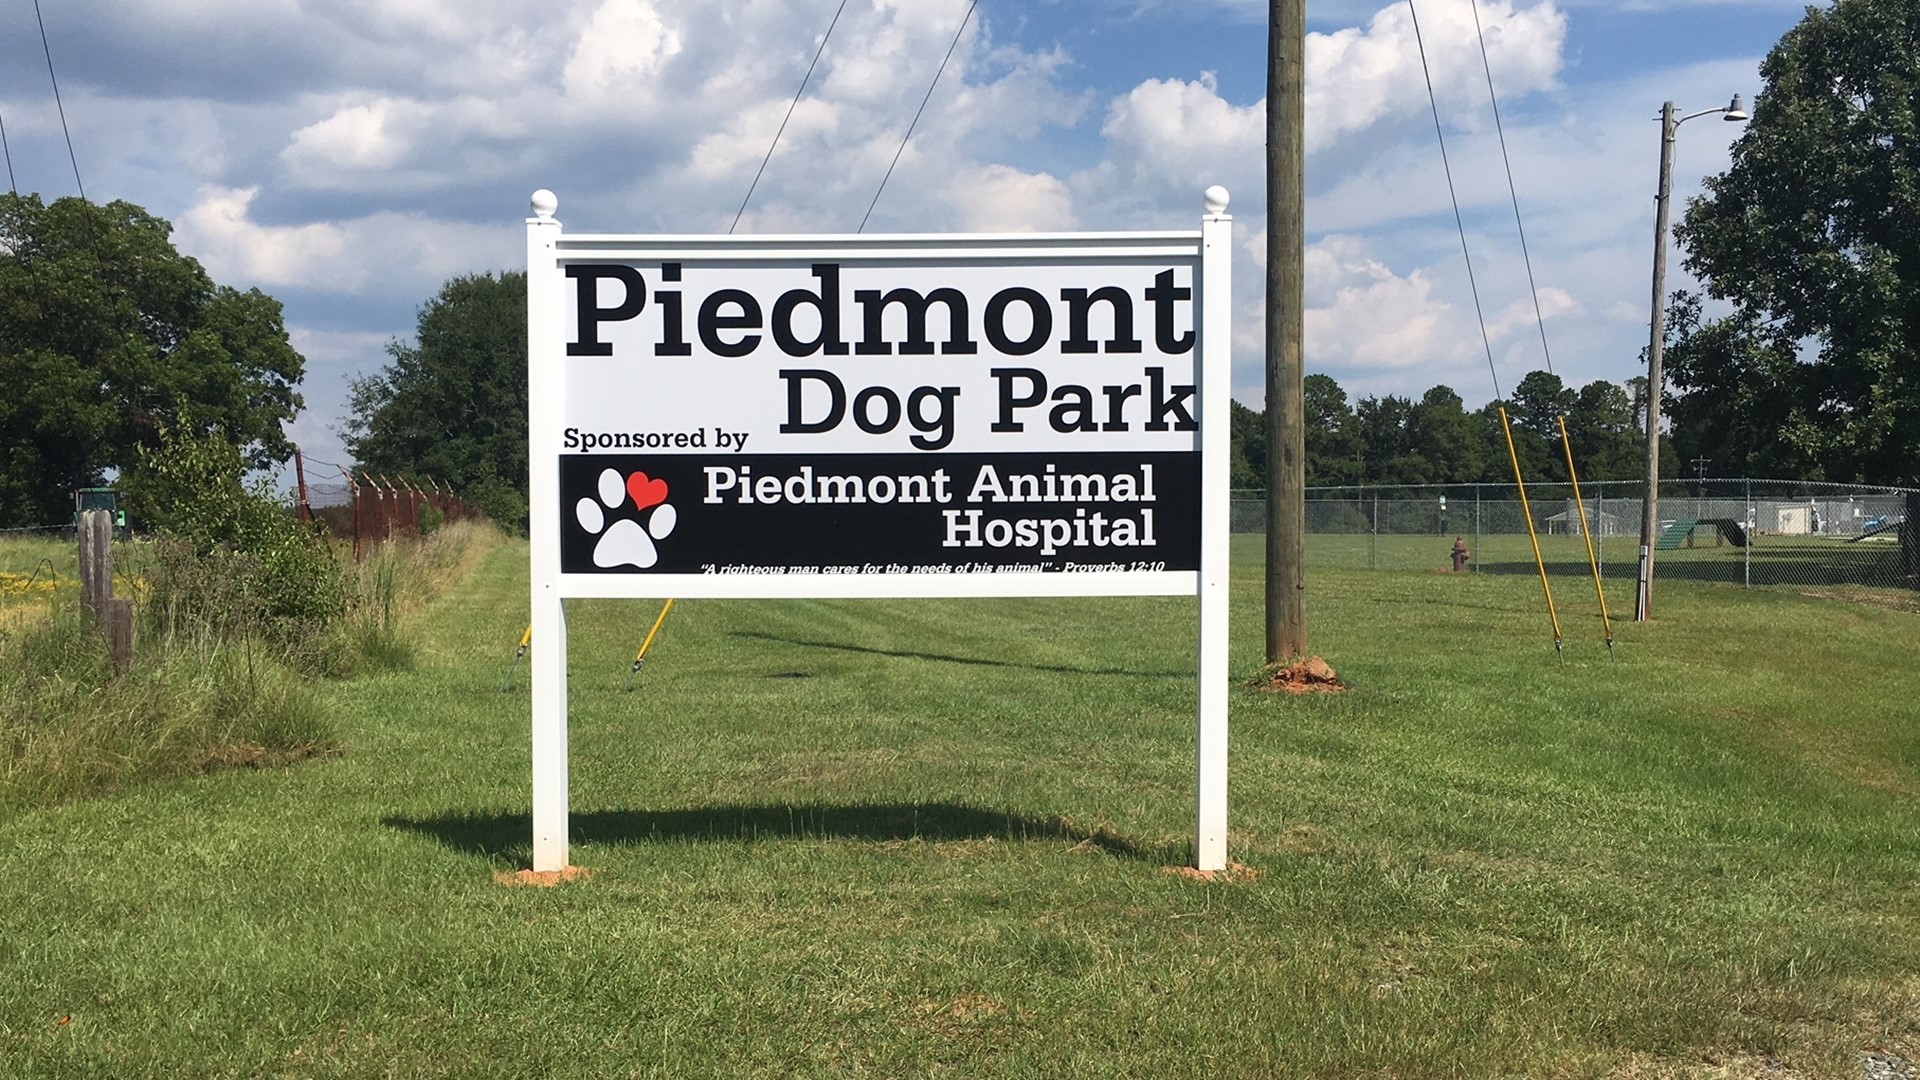 The grand opening for the Piedmont Dog Park is Tuesday at 11:30 a.m. on Industrial Boulevard across from the Jones County Government Center.